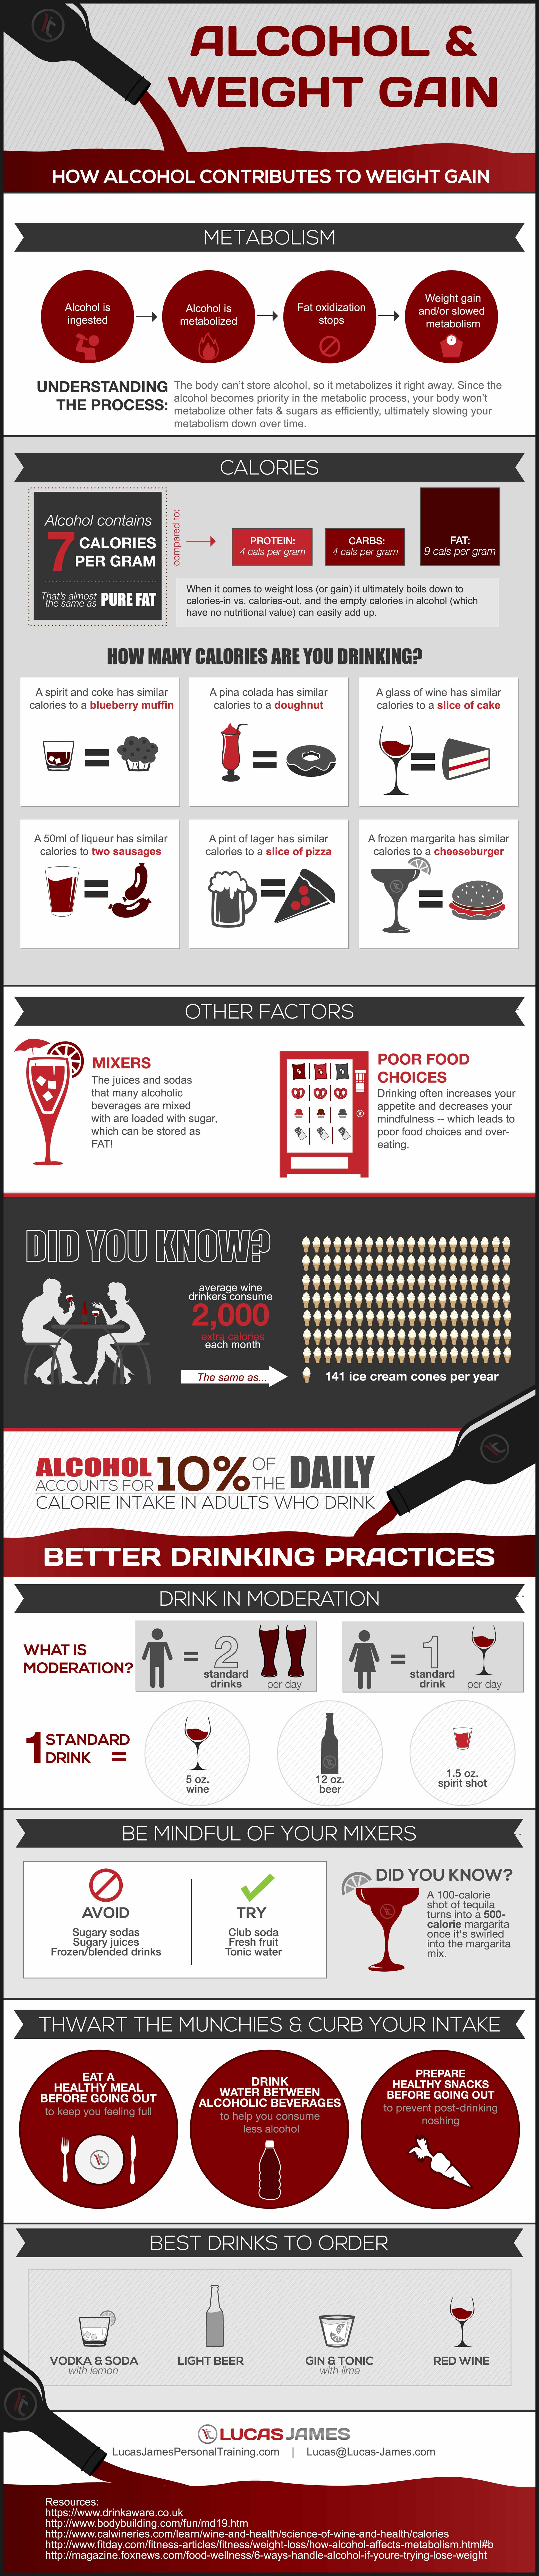 How Alcohol Contributes to Weight Gain